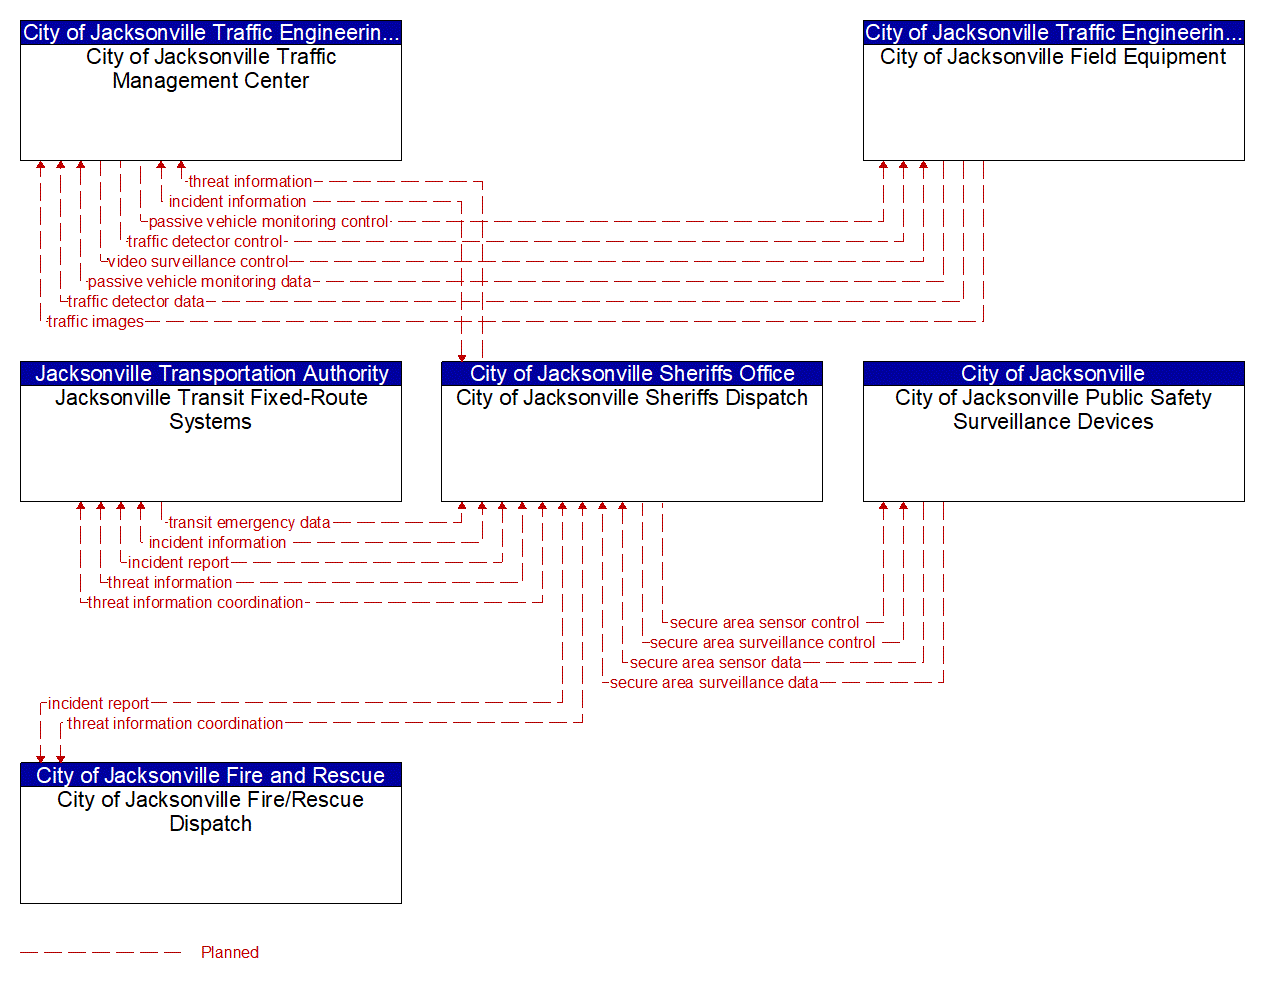 Project Information Flow Diagram: City of Jacksonville Traffic Engineering Division